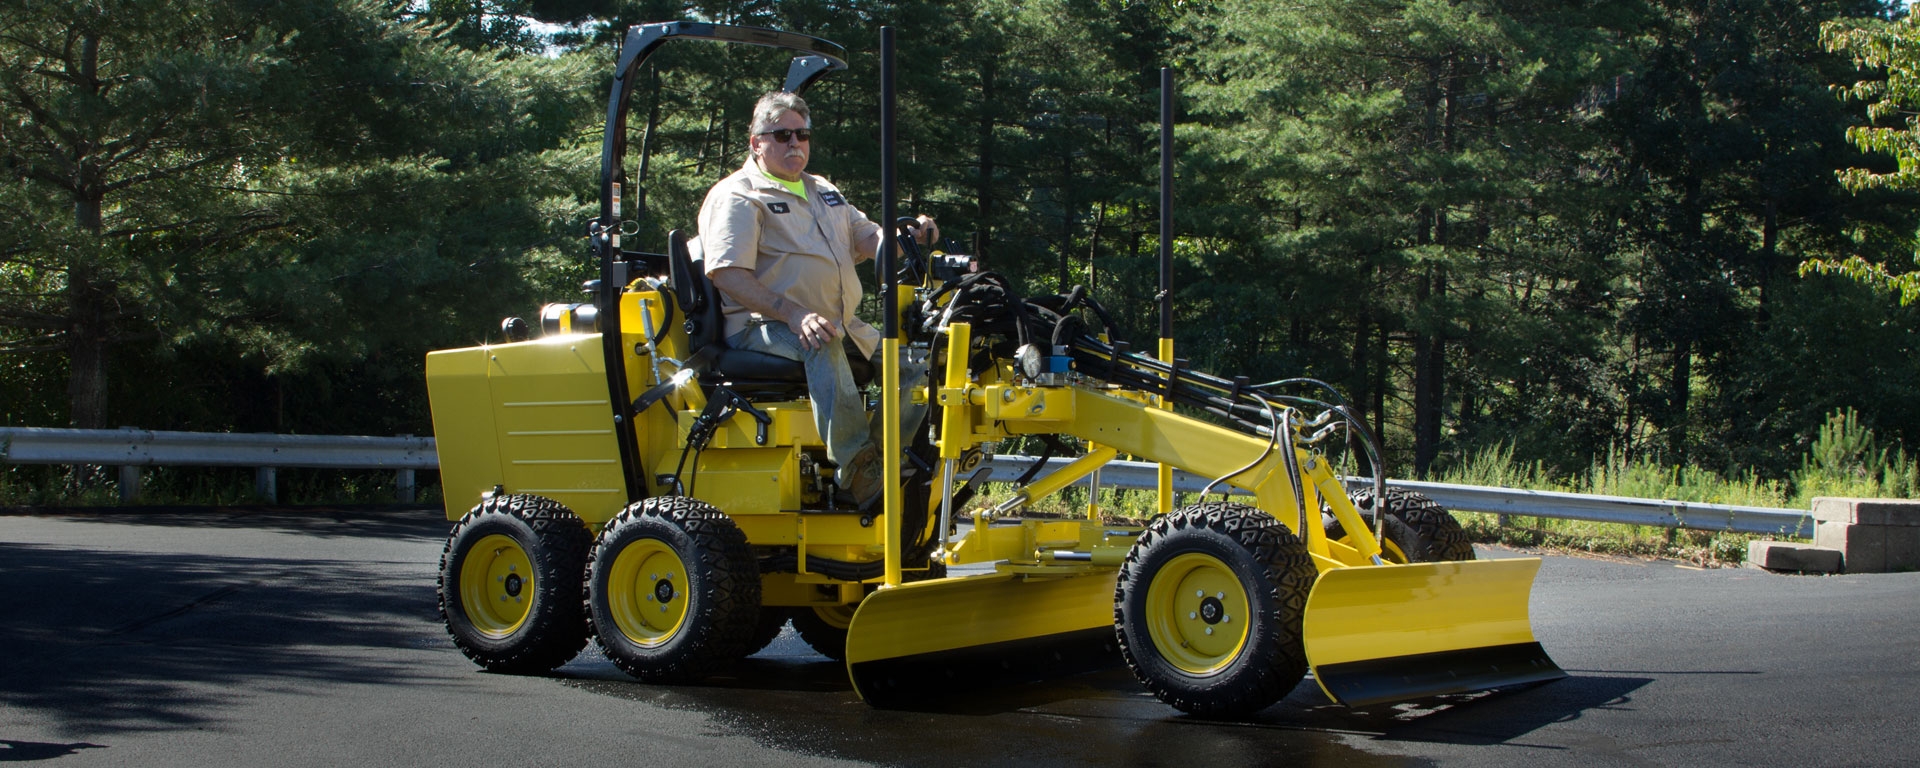 The Laser Grader makes quick work of grading projects with only one operator